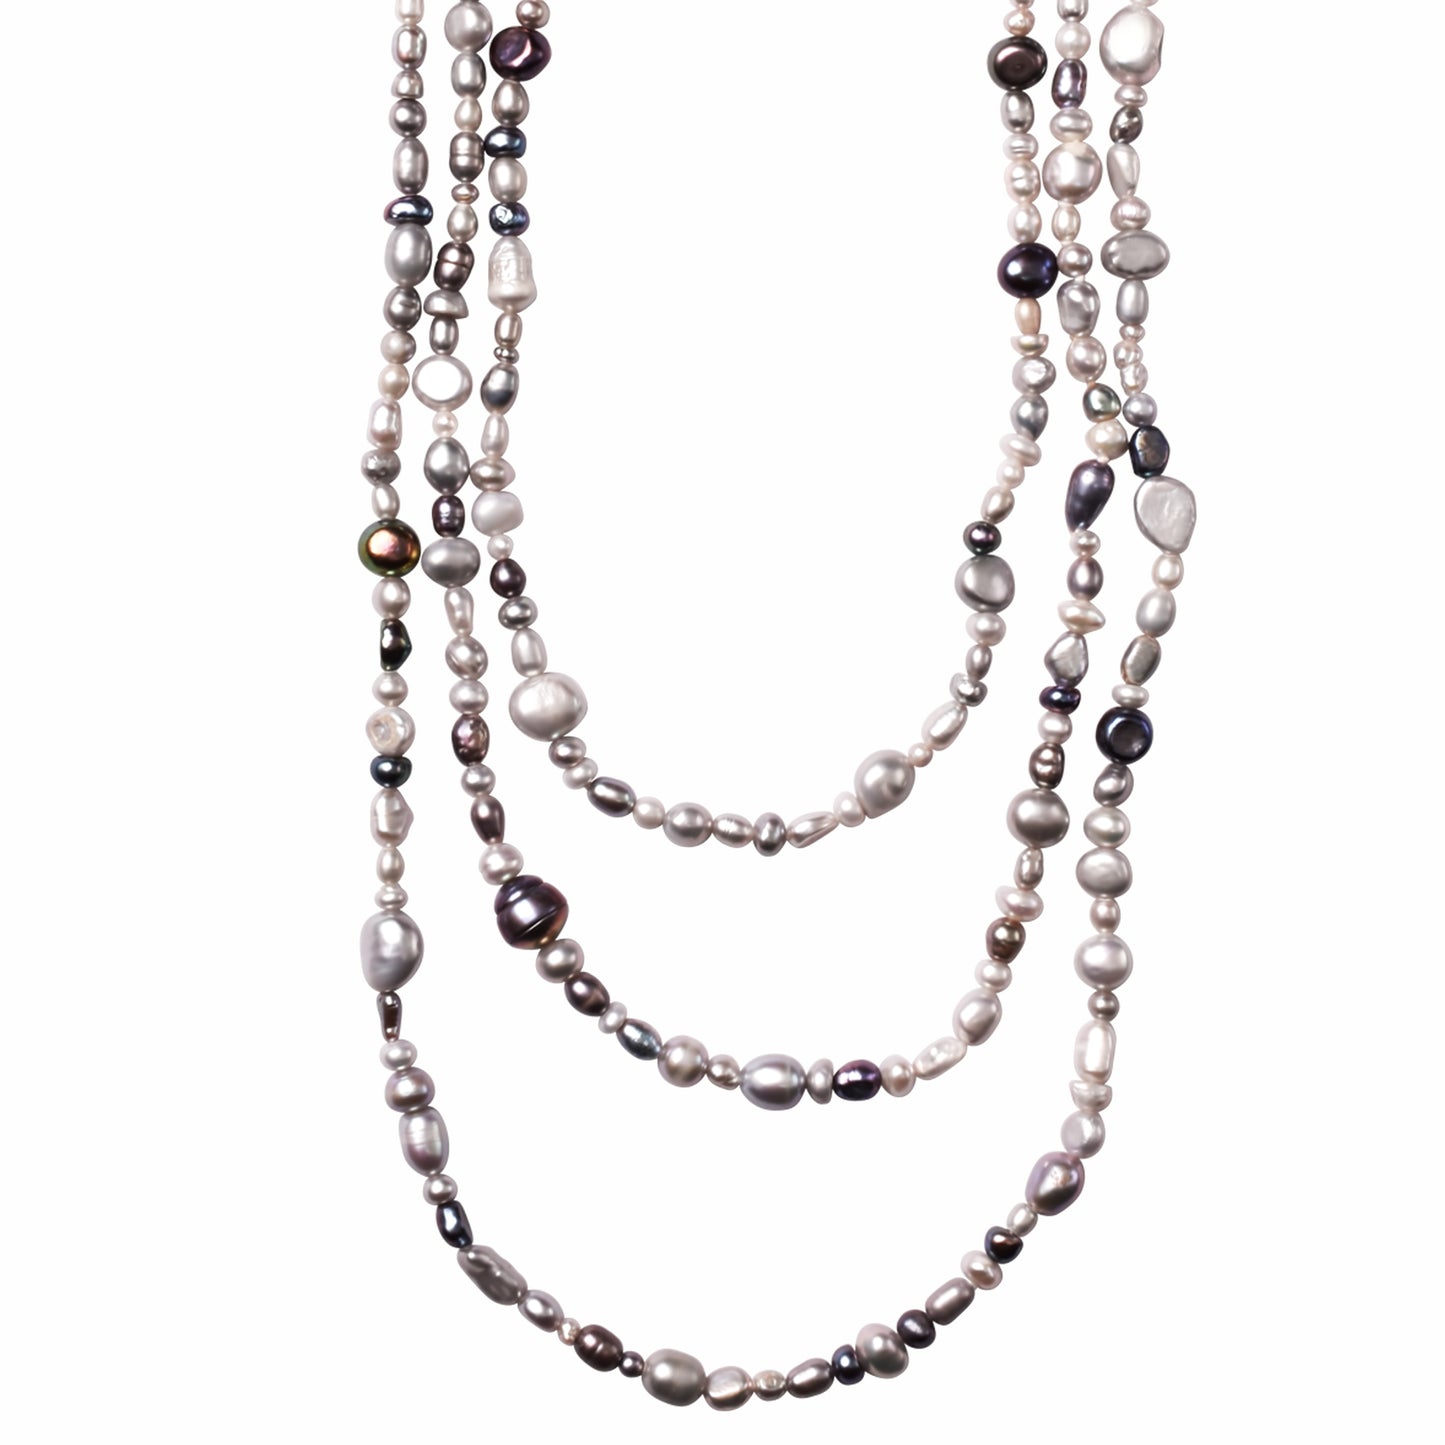 Endless Silver Mixed Freshwater Pearls Necklace 72"